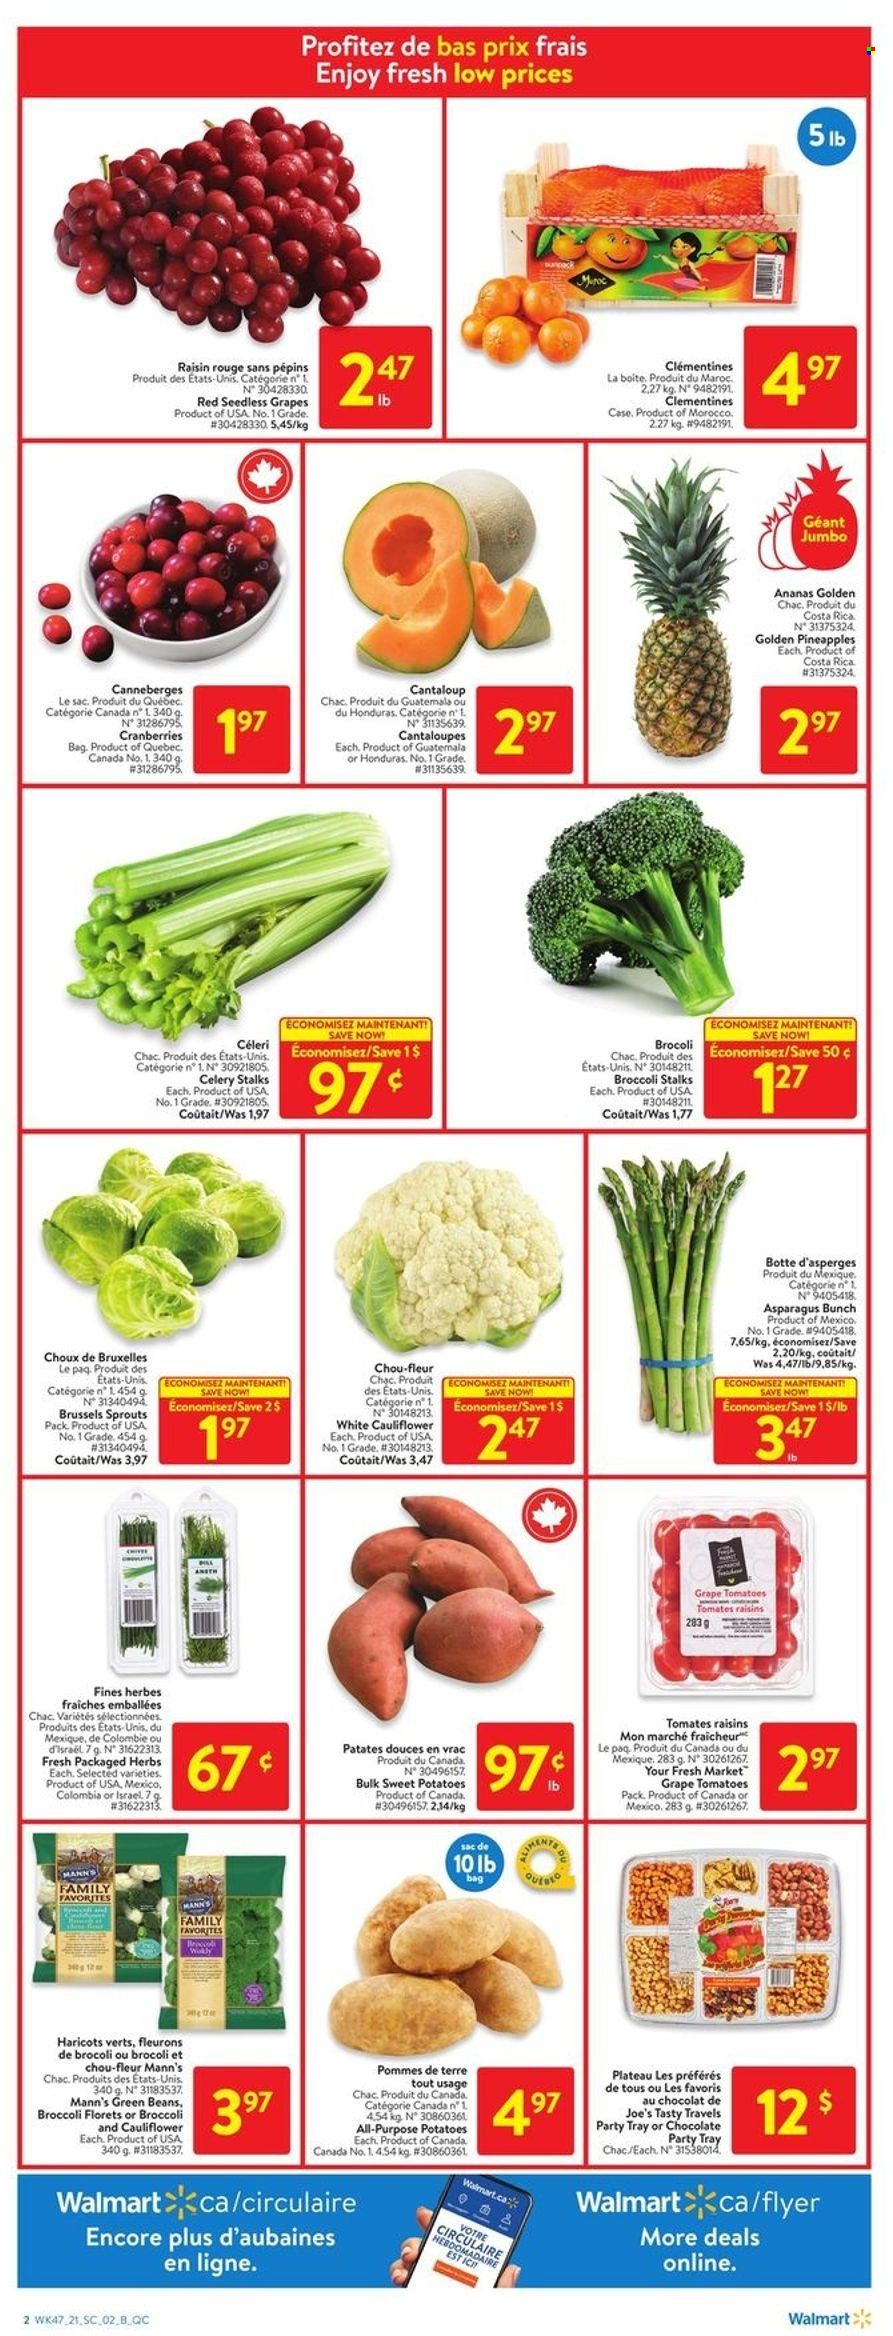 thumbnail - Walmart Flyer - December 16, 2021 - December 24, 2021 - Sales products - asparagus, broccoli, cantaloupe, cauliflower, celery, green beans, sweet potato, tomatoes, potatoes, brussel sprouts, sleeved celery, clementines, seedless grapes, pineapple, chocolate, cranberries, dried fruit, raisins. Page 2.